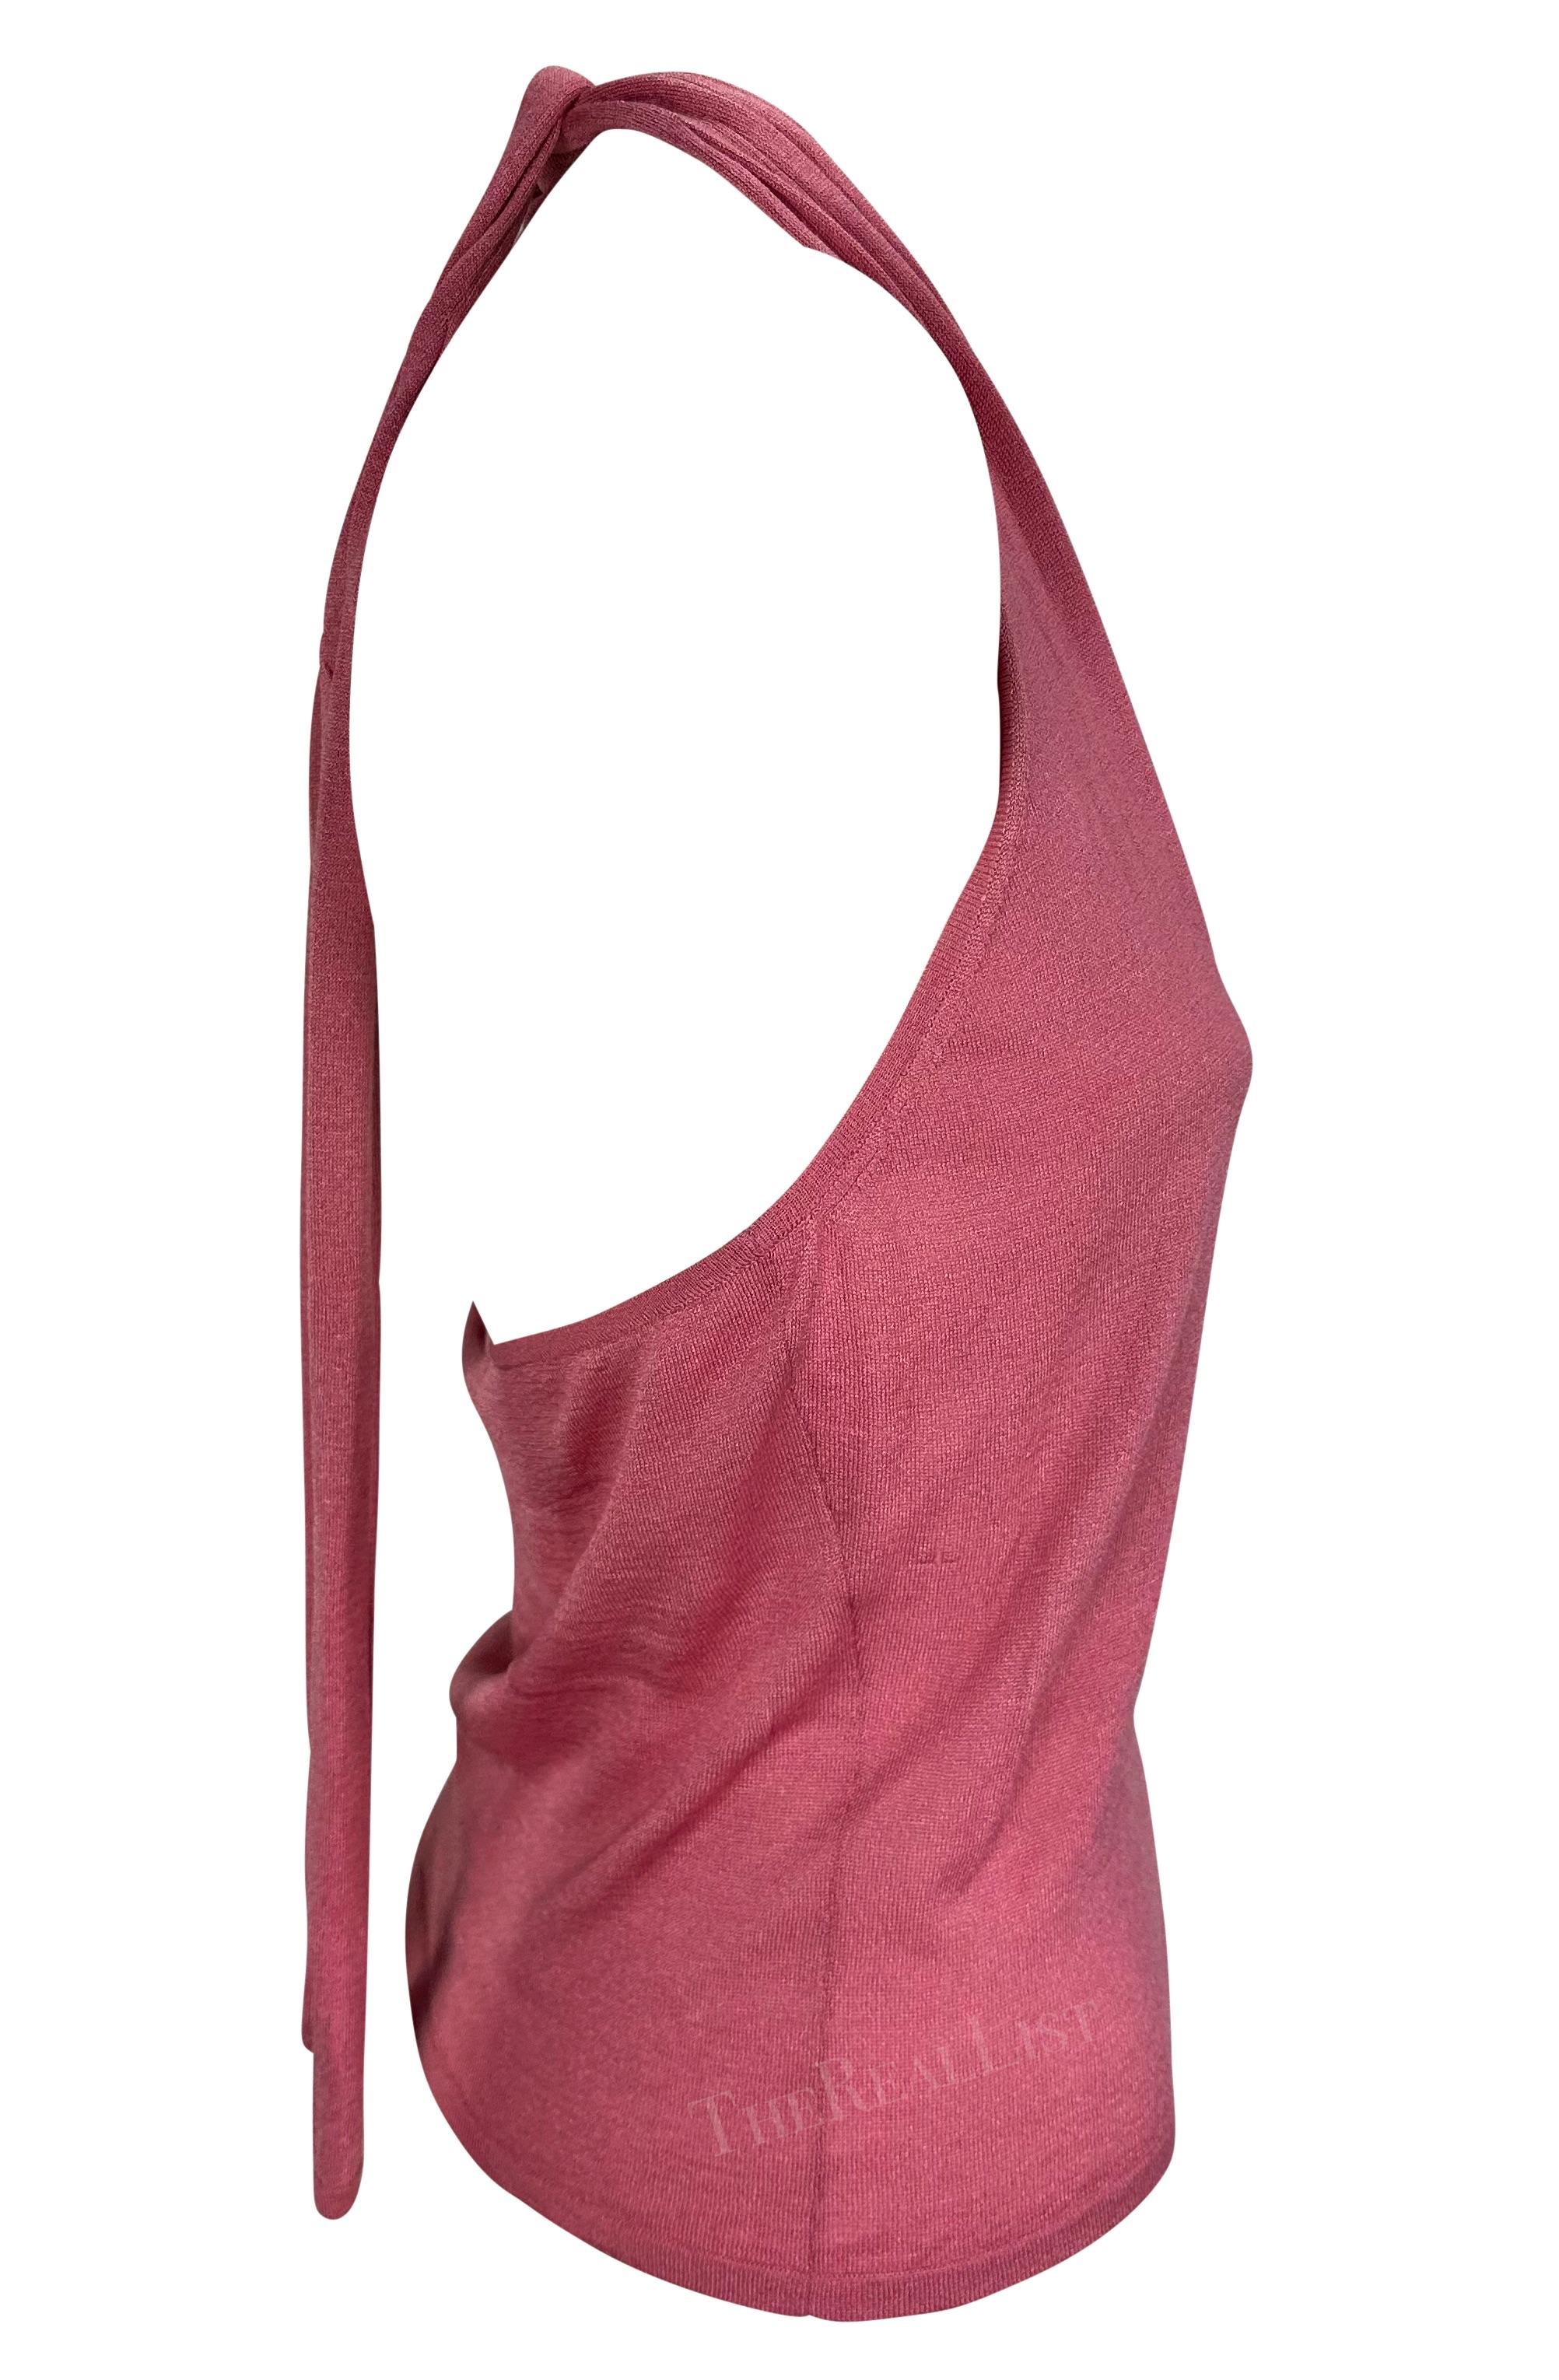 NWT 2000s Gucci by Tom Ford Pink Sheer Knit Halter Neck Tie Backless Top For Sale 1